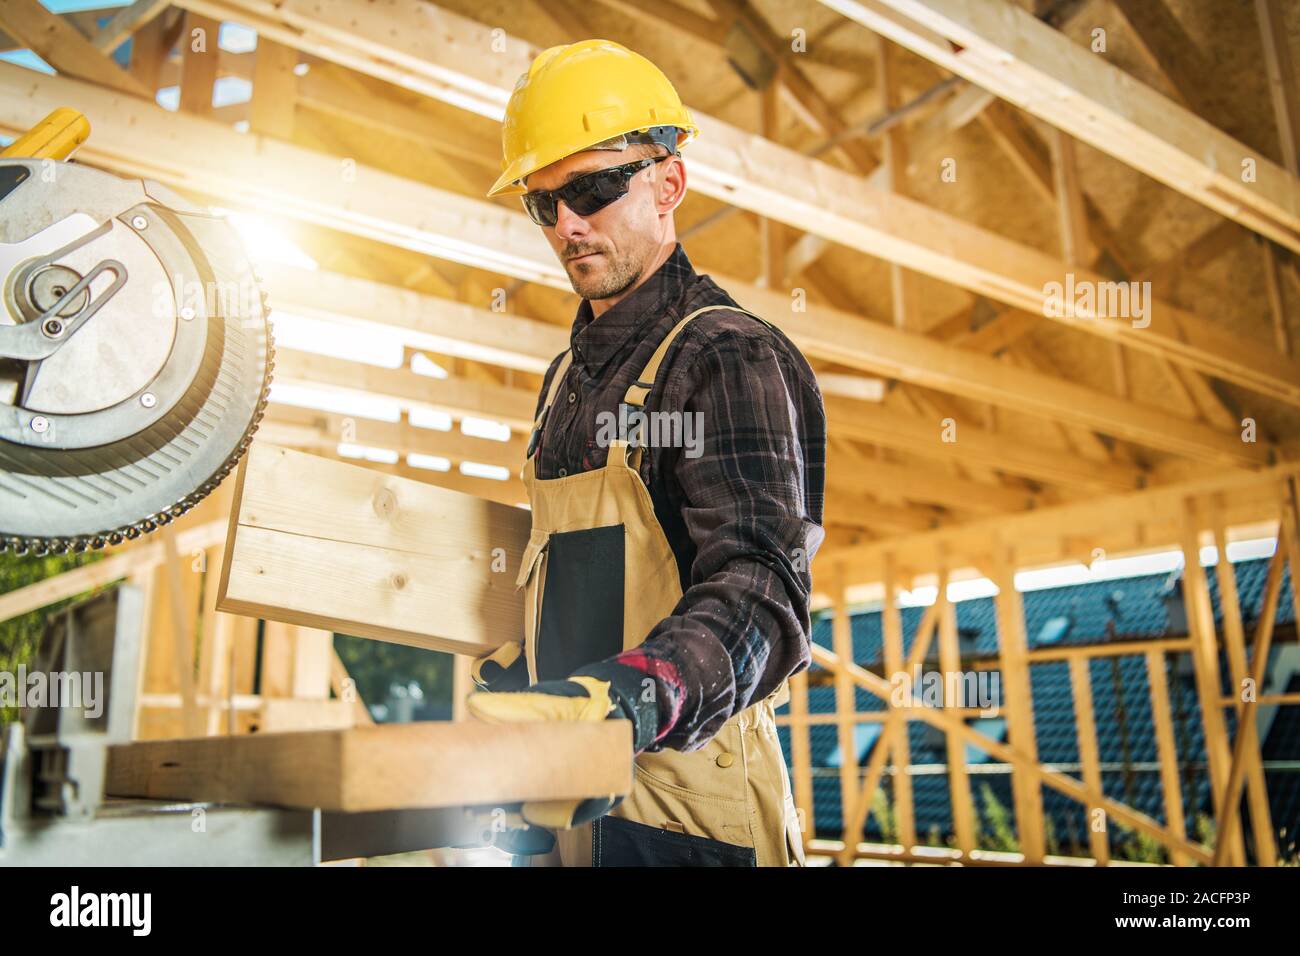 Caucasian Carpenter Worker and the Wooden House Skeleton Frame. Construction Industry Theme. Stock Photo